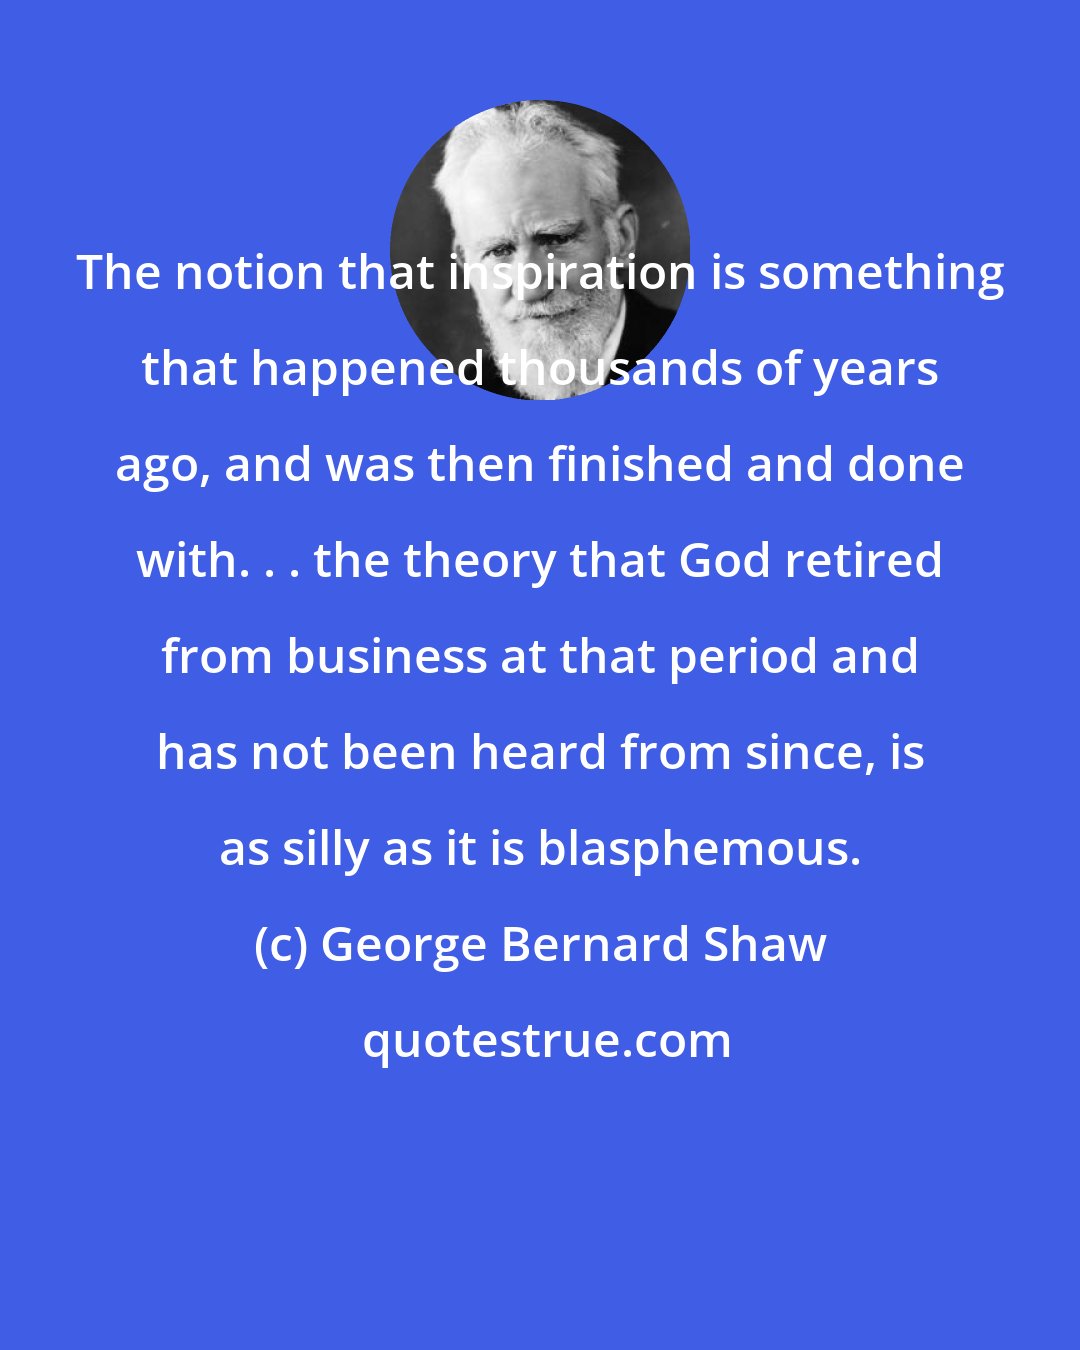 George Bernard Shaw: The notion that inspiration is something that happened thousands of years ago, and was then finished and done with. . . the theory that God retired from business at that period and has not been heard from since, is as silly as it is blasphemous.